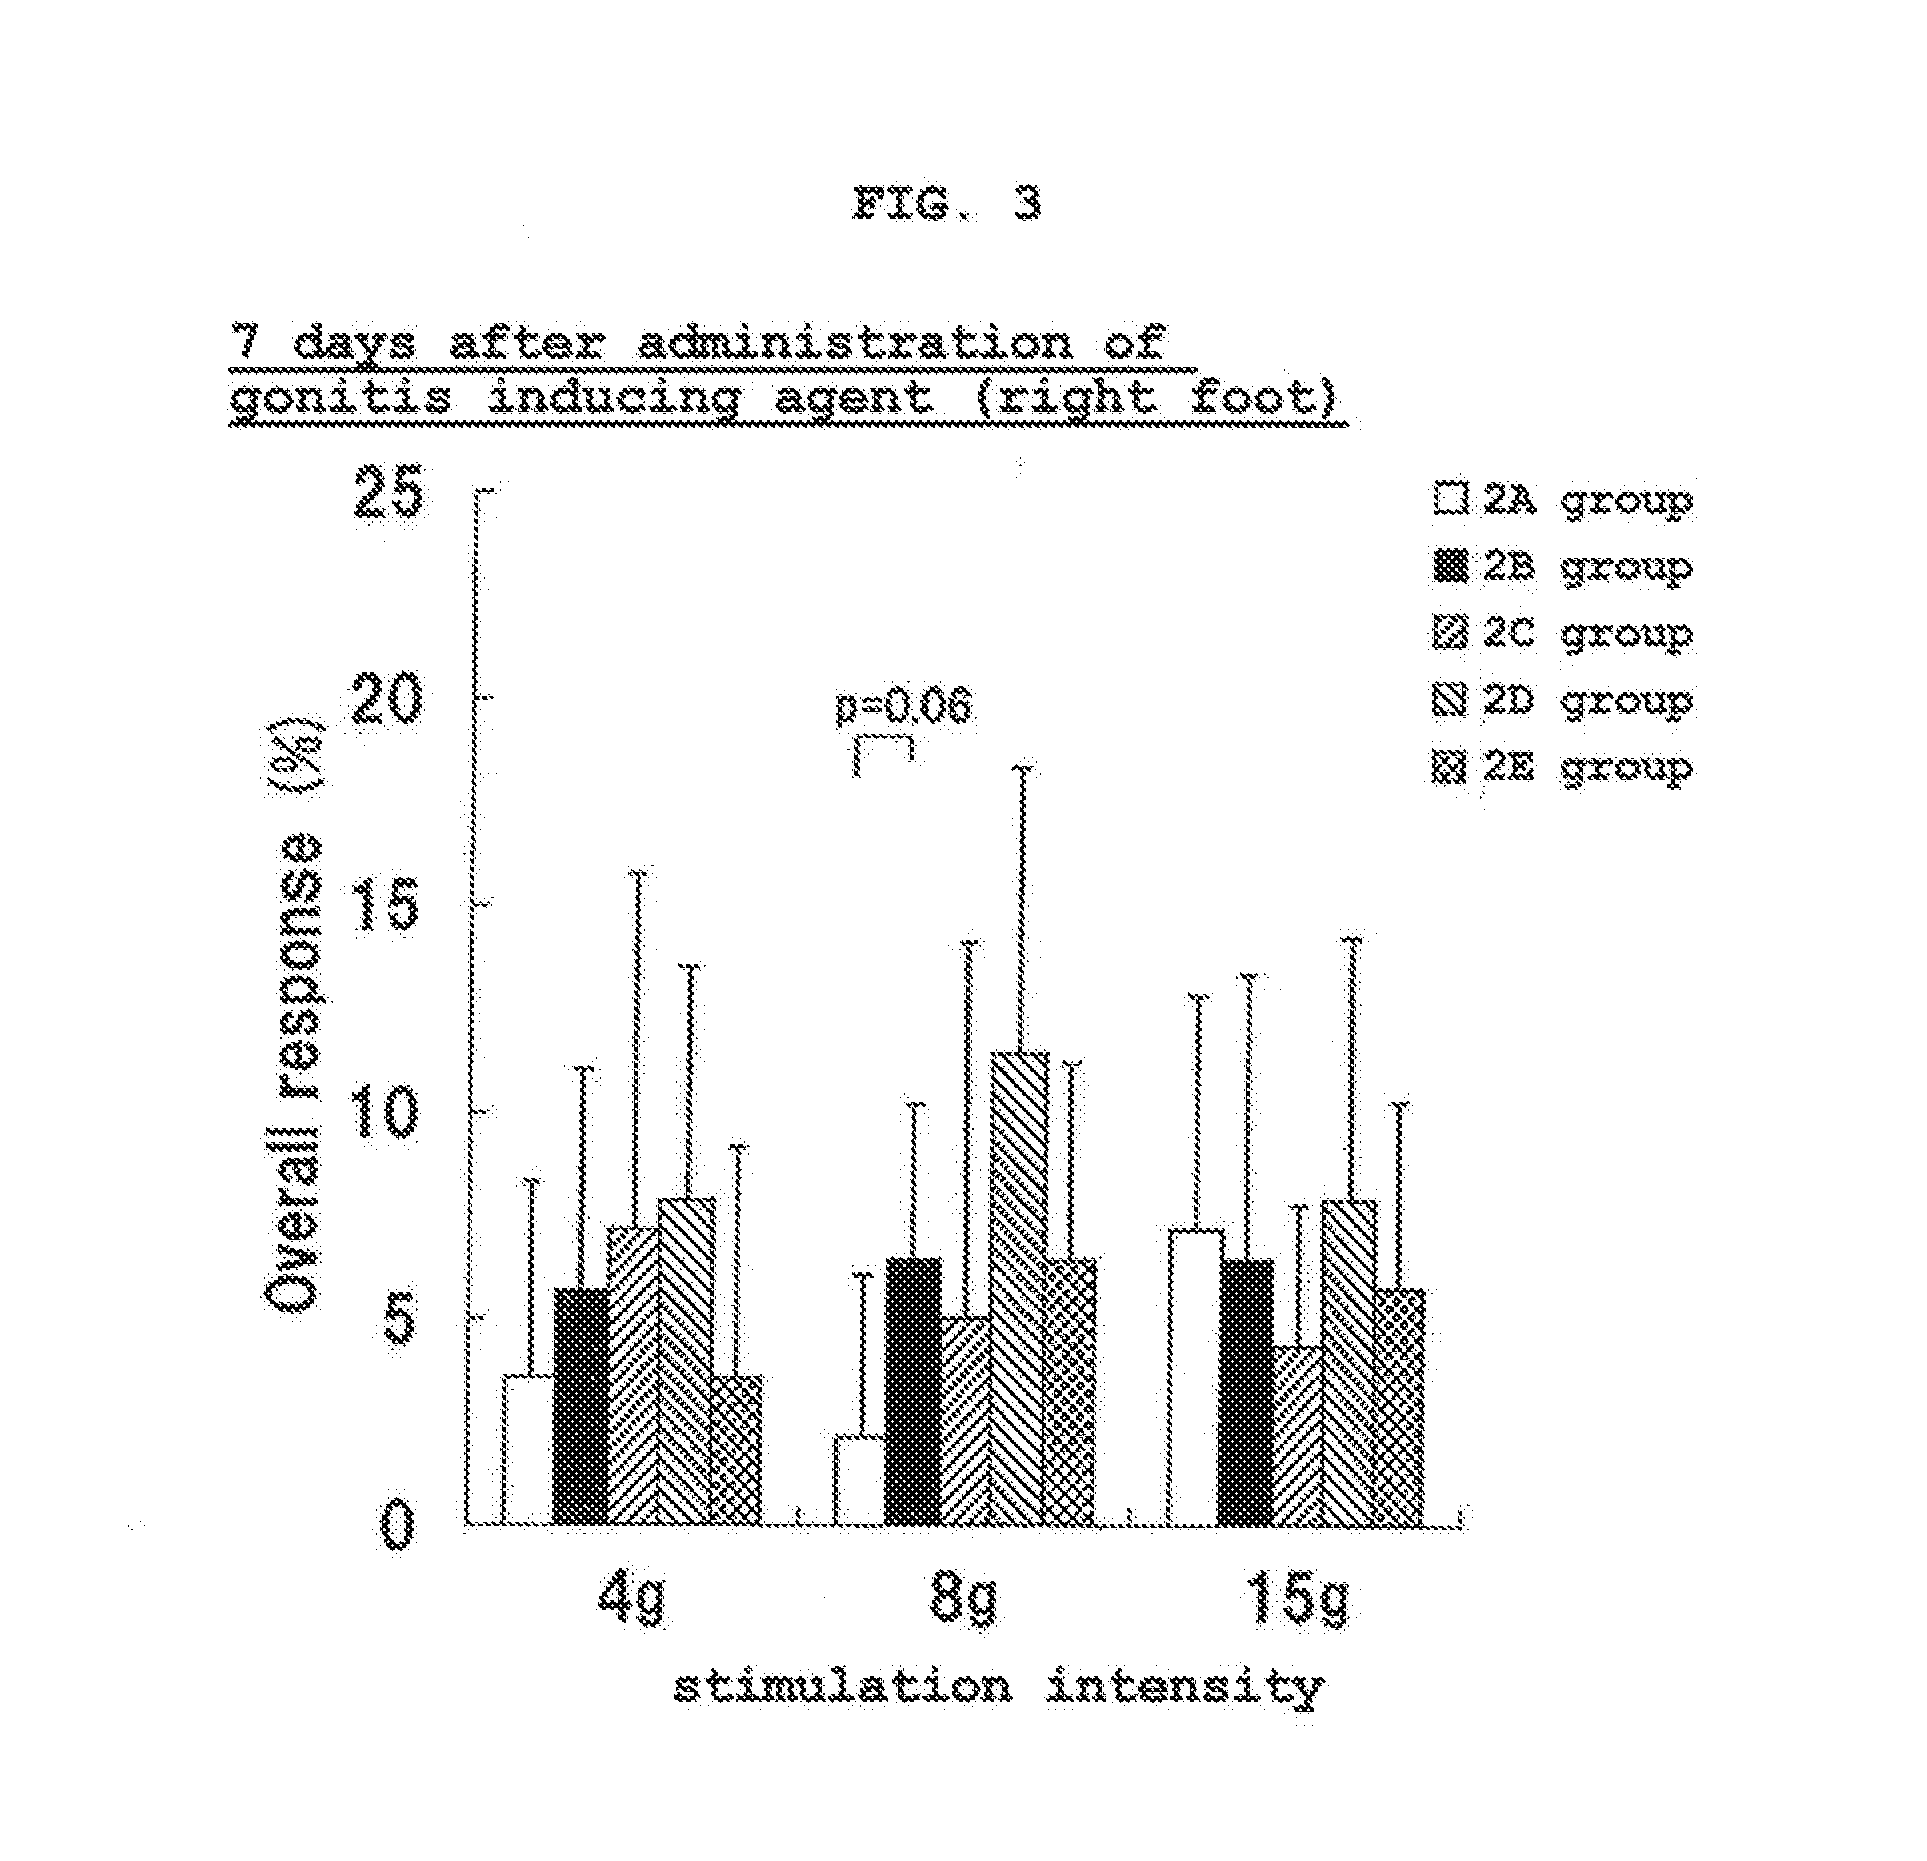 Composition for preventing or improving peripheral neuropathy